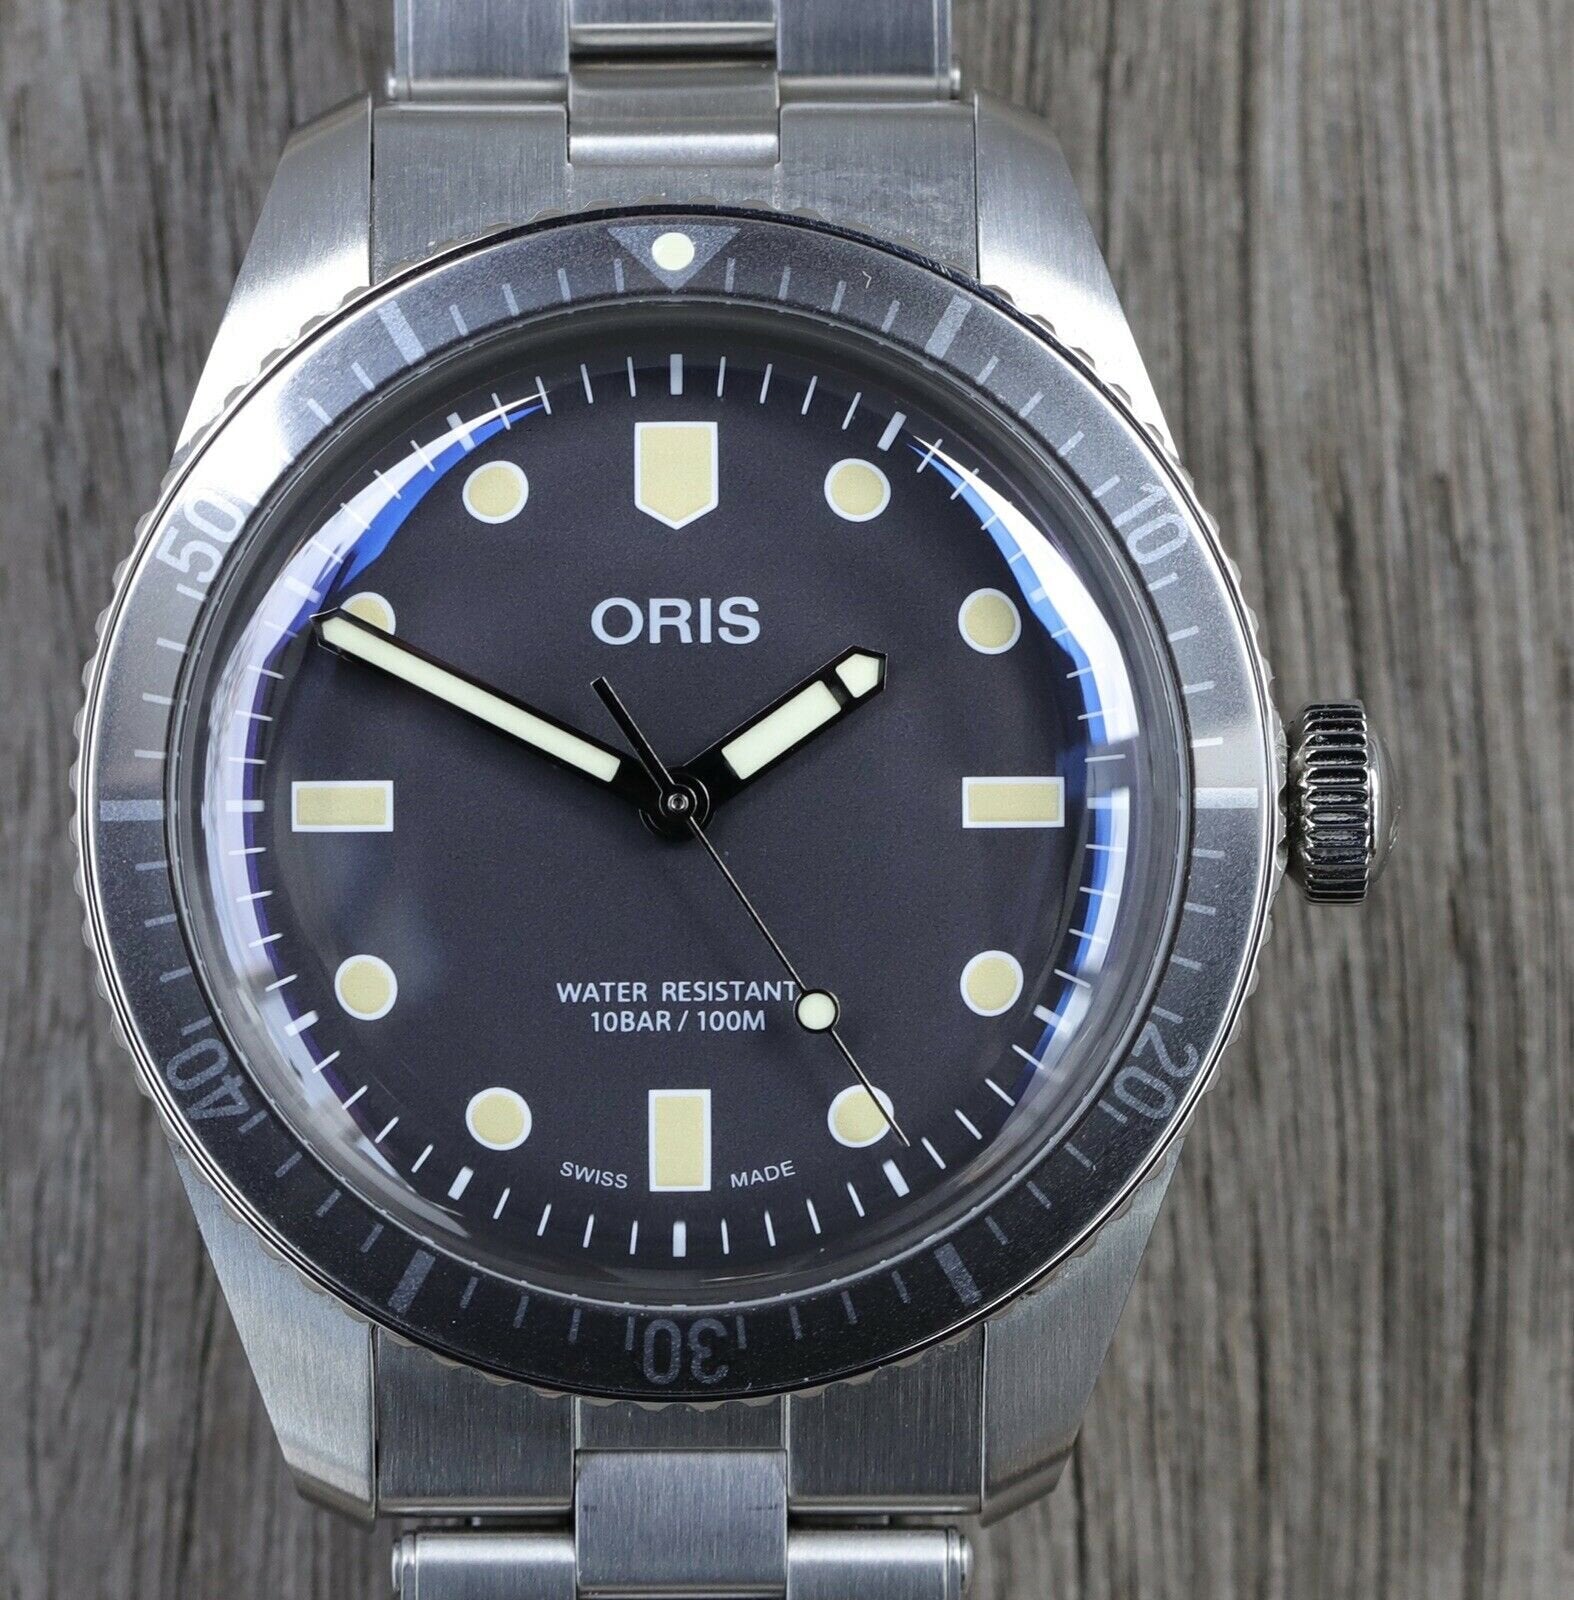 Oris_Diver_Sixty_Five_Limited_Edition_for_HODINKEE_01_730_7757_4083_-_2019_Watch_Vault_01.jpg